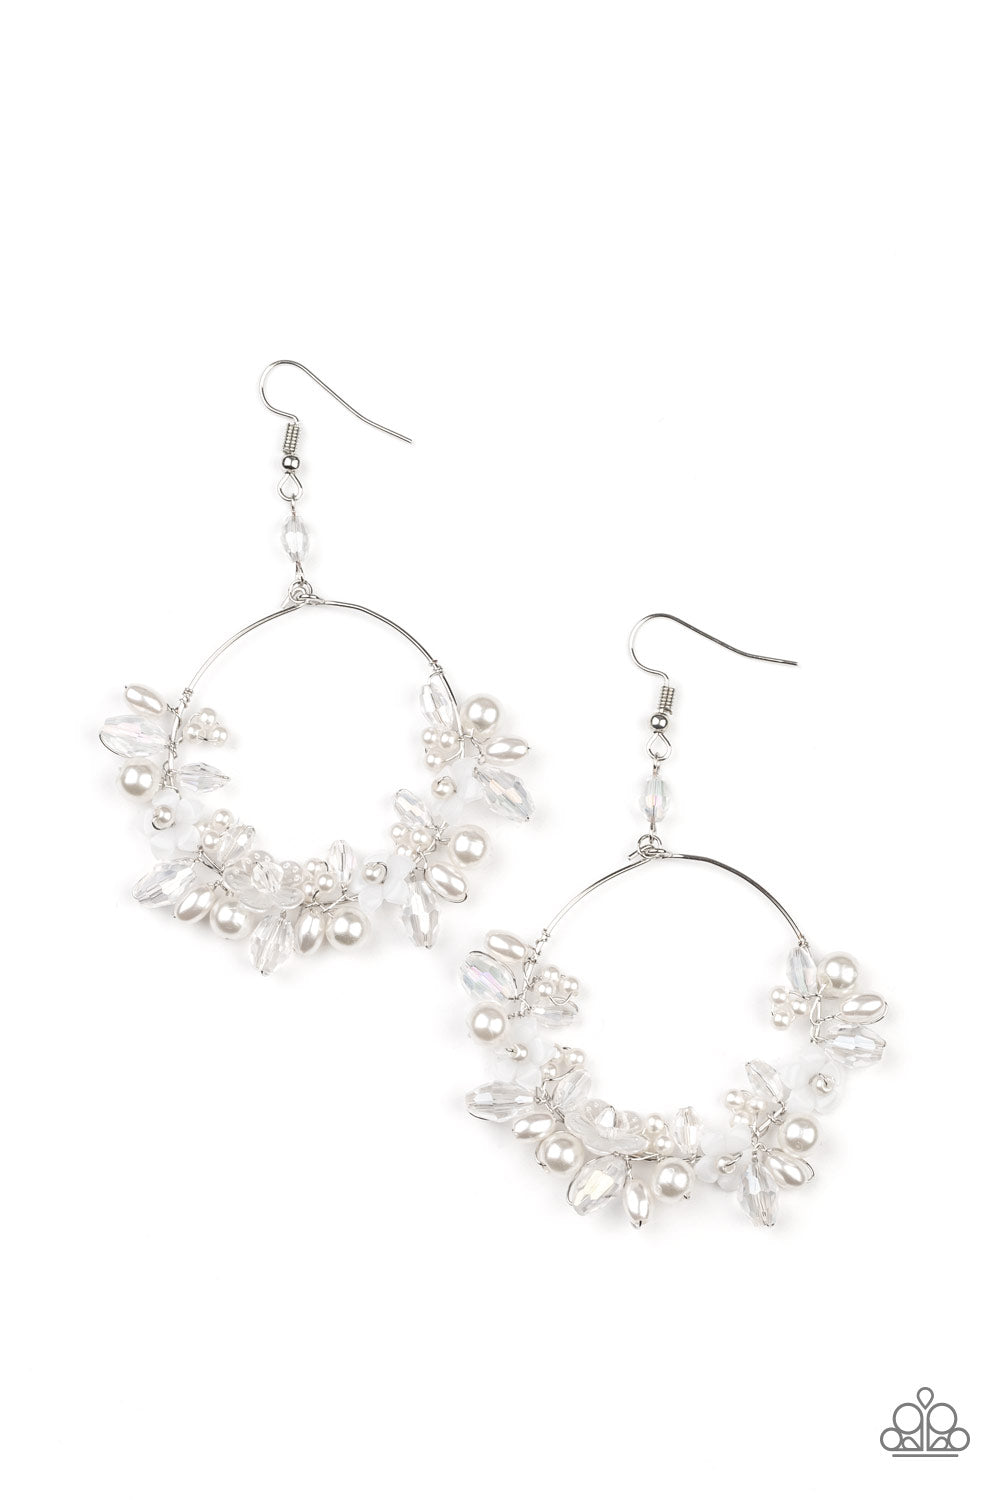 Floating Gardens - White Pearl Life of the Party Earrings a timeless collection of iridescent crystal-like accents, dainty white pearls, and white floral frames delicately cluster along the bottom of a silver hoop, creating a glamorous glow. Earring attaches to a standard fishhook fitting.  Sold as one pair of earrings.